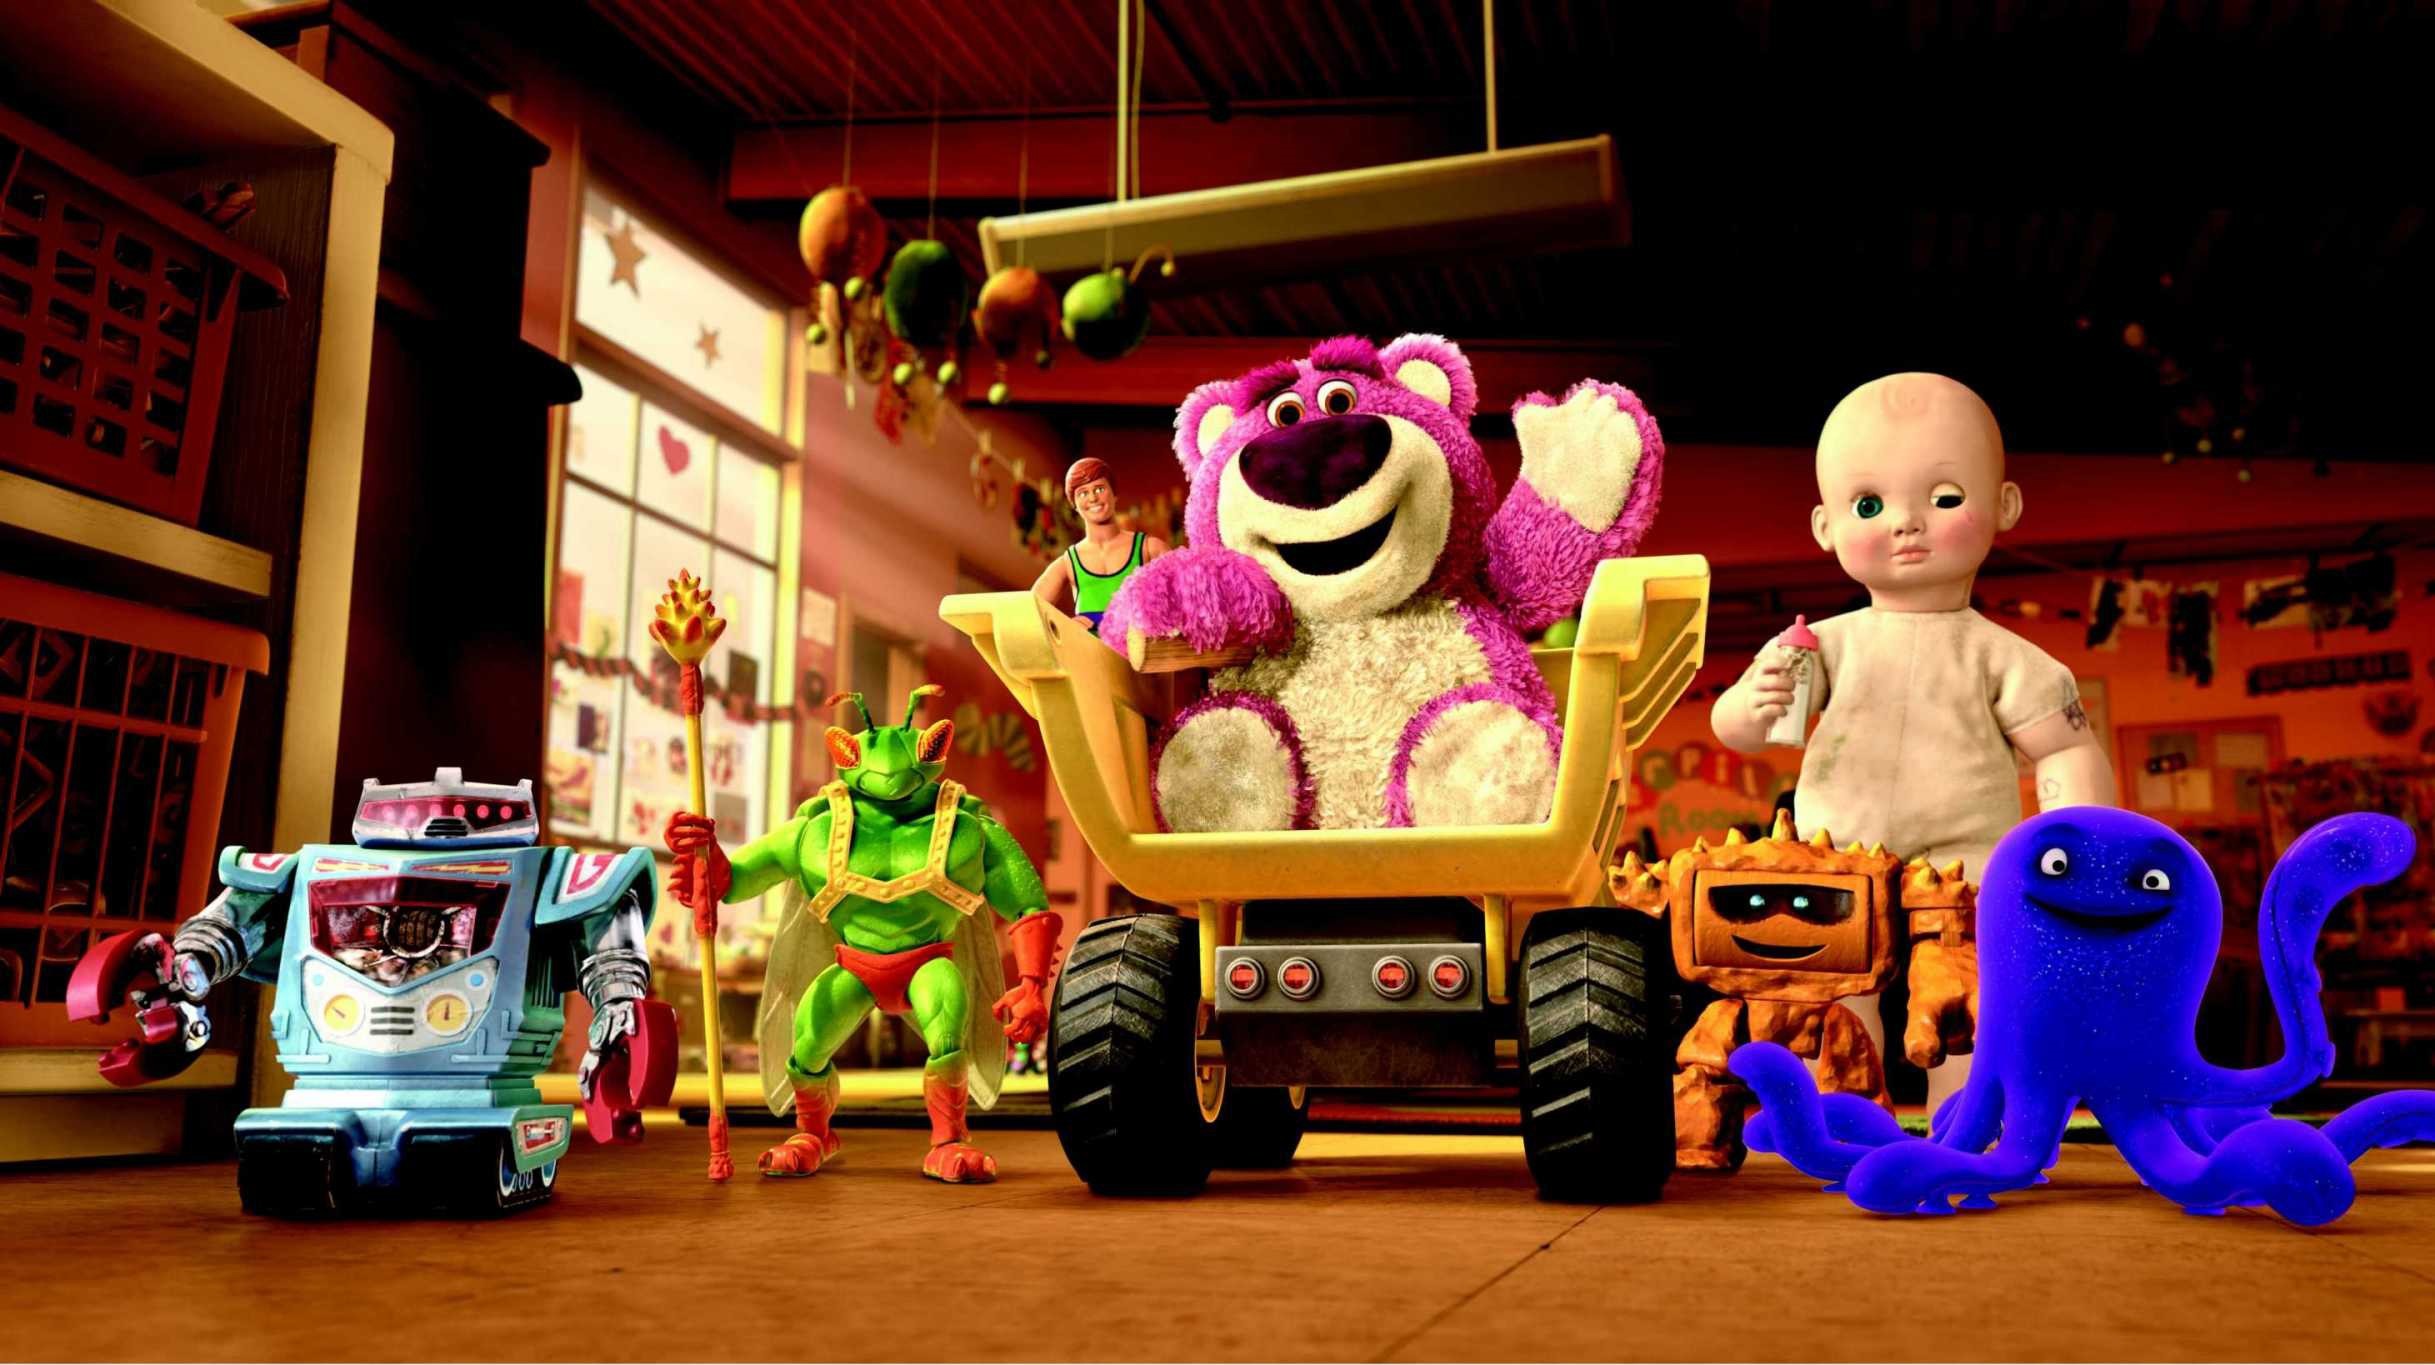 Src Toy Story Wallpapers For Mobile Hd 
 Data Id - Bad Guys From Toy Story 3 - HD Wallpaper 